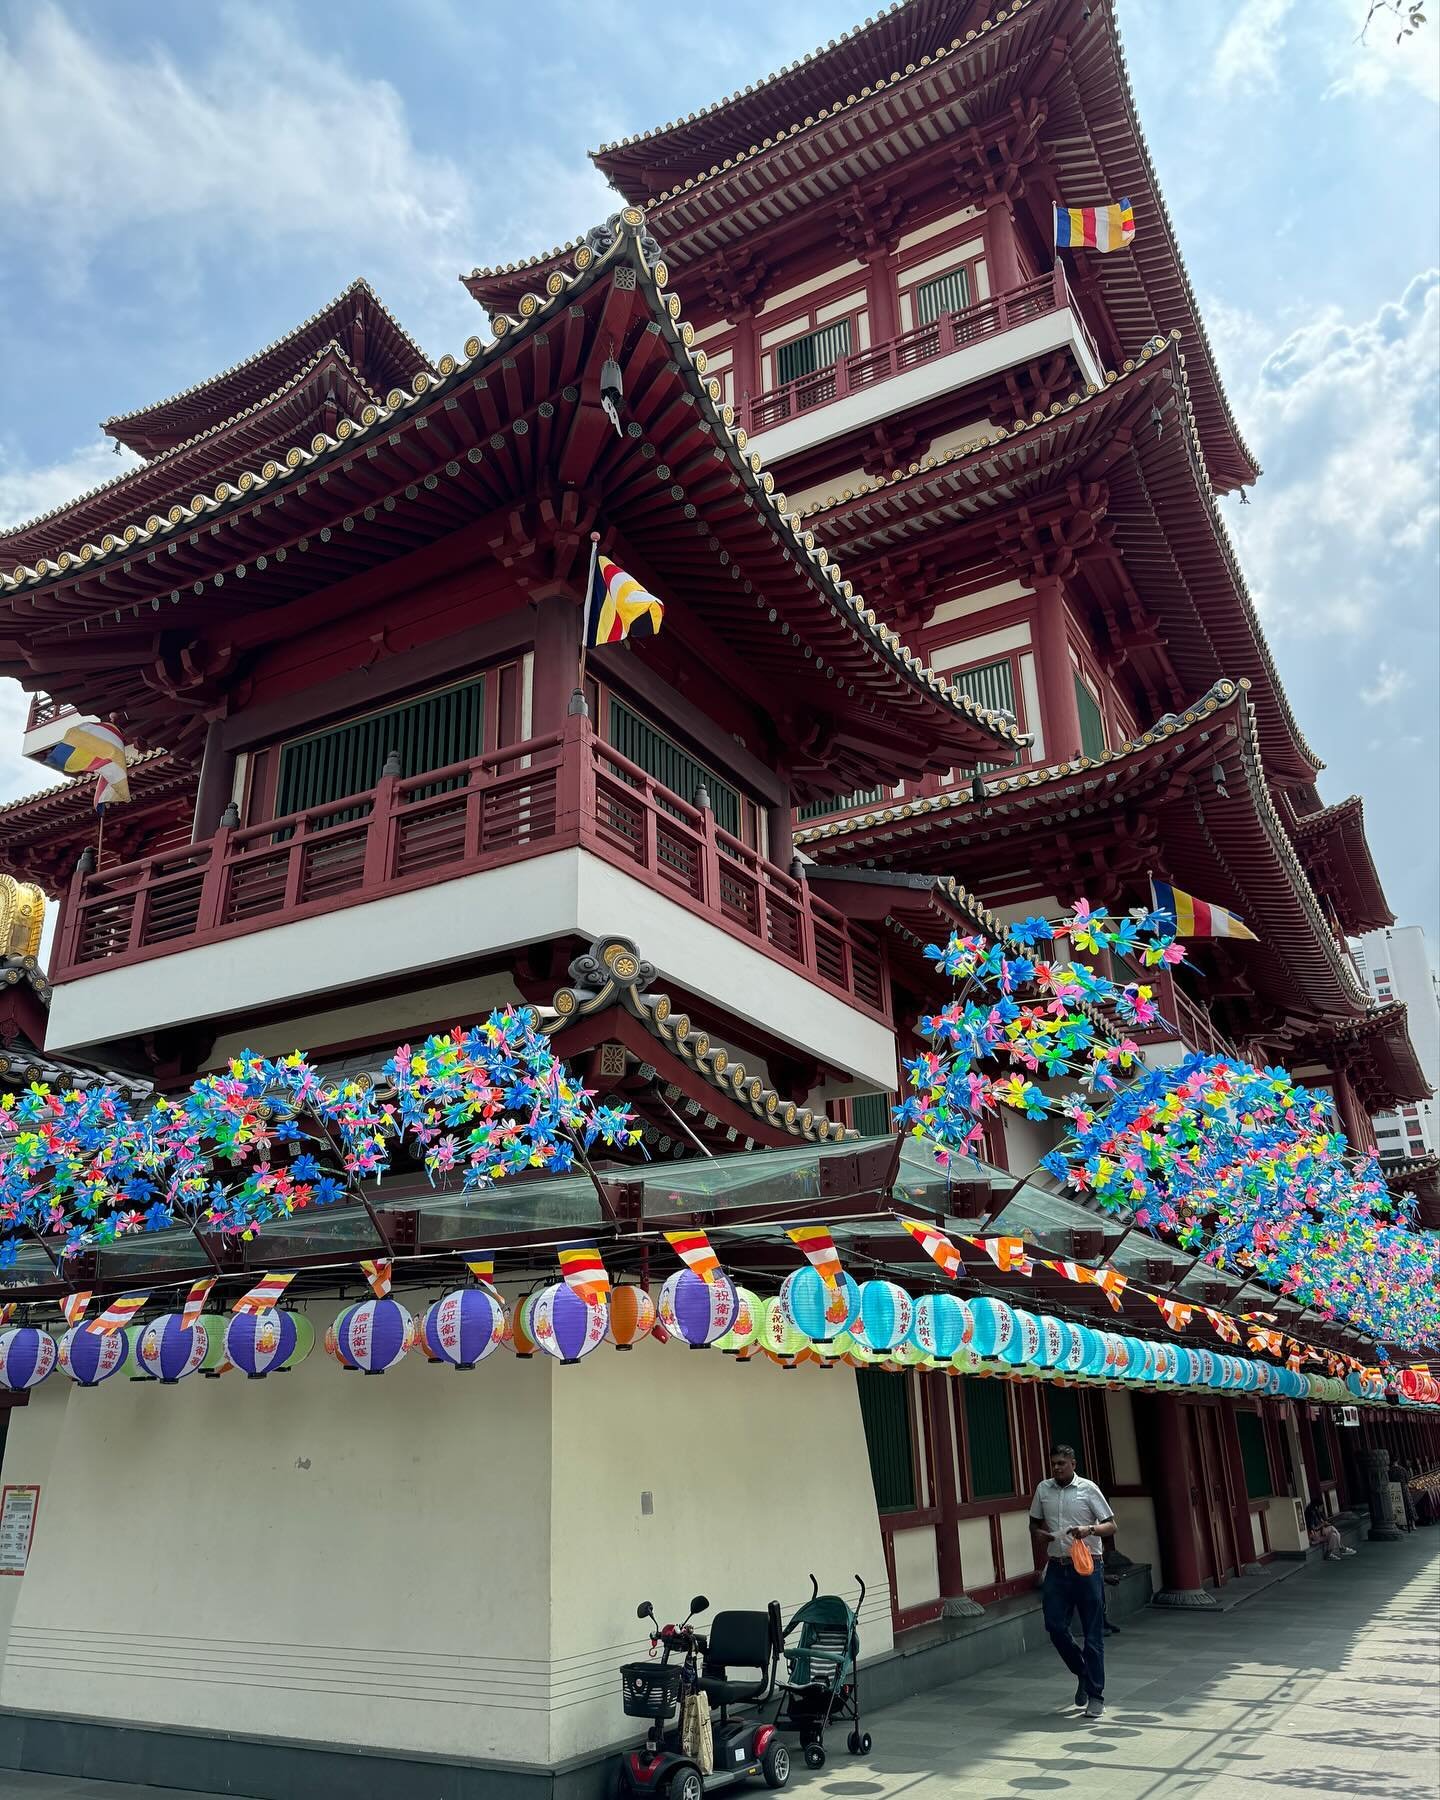 Buddha Tooth Relic Temple &amp; Museum, located in the heart of Chinatown, with it&rsquo;s richly designed interiors and comprehensive exhibits on Buddhist art and history, tells stories of a culture over thousands of years old. This Tang-styled buil